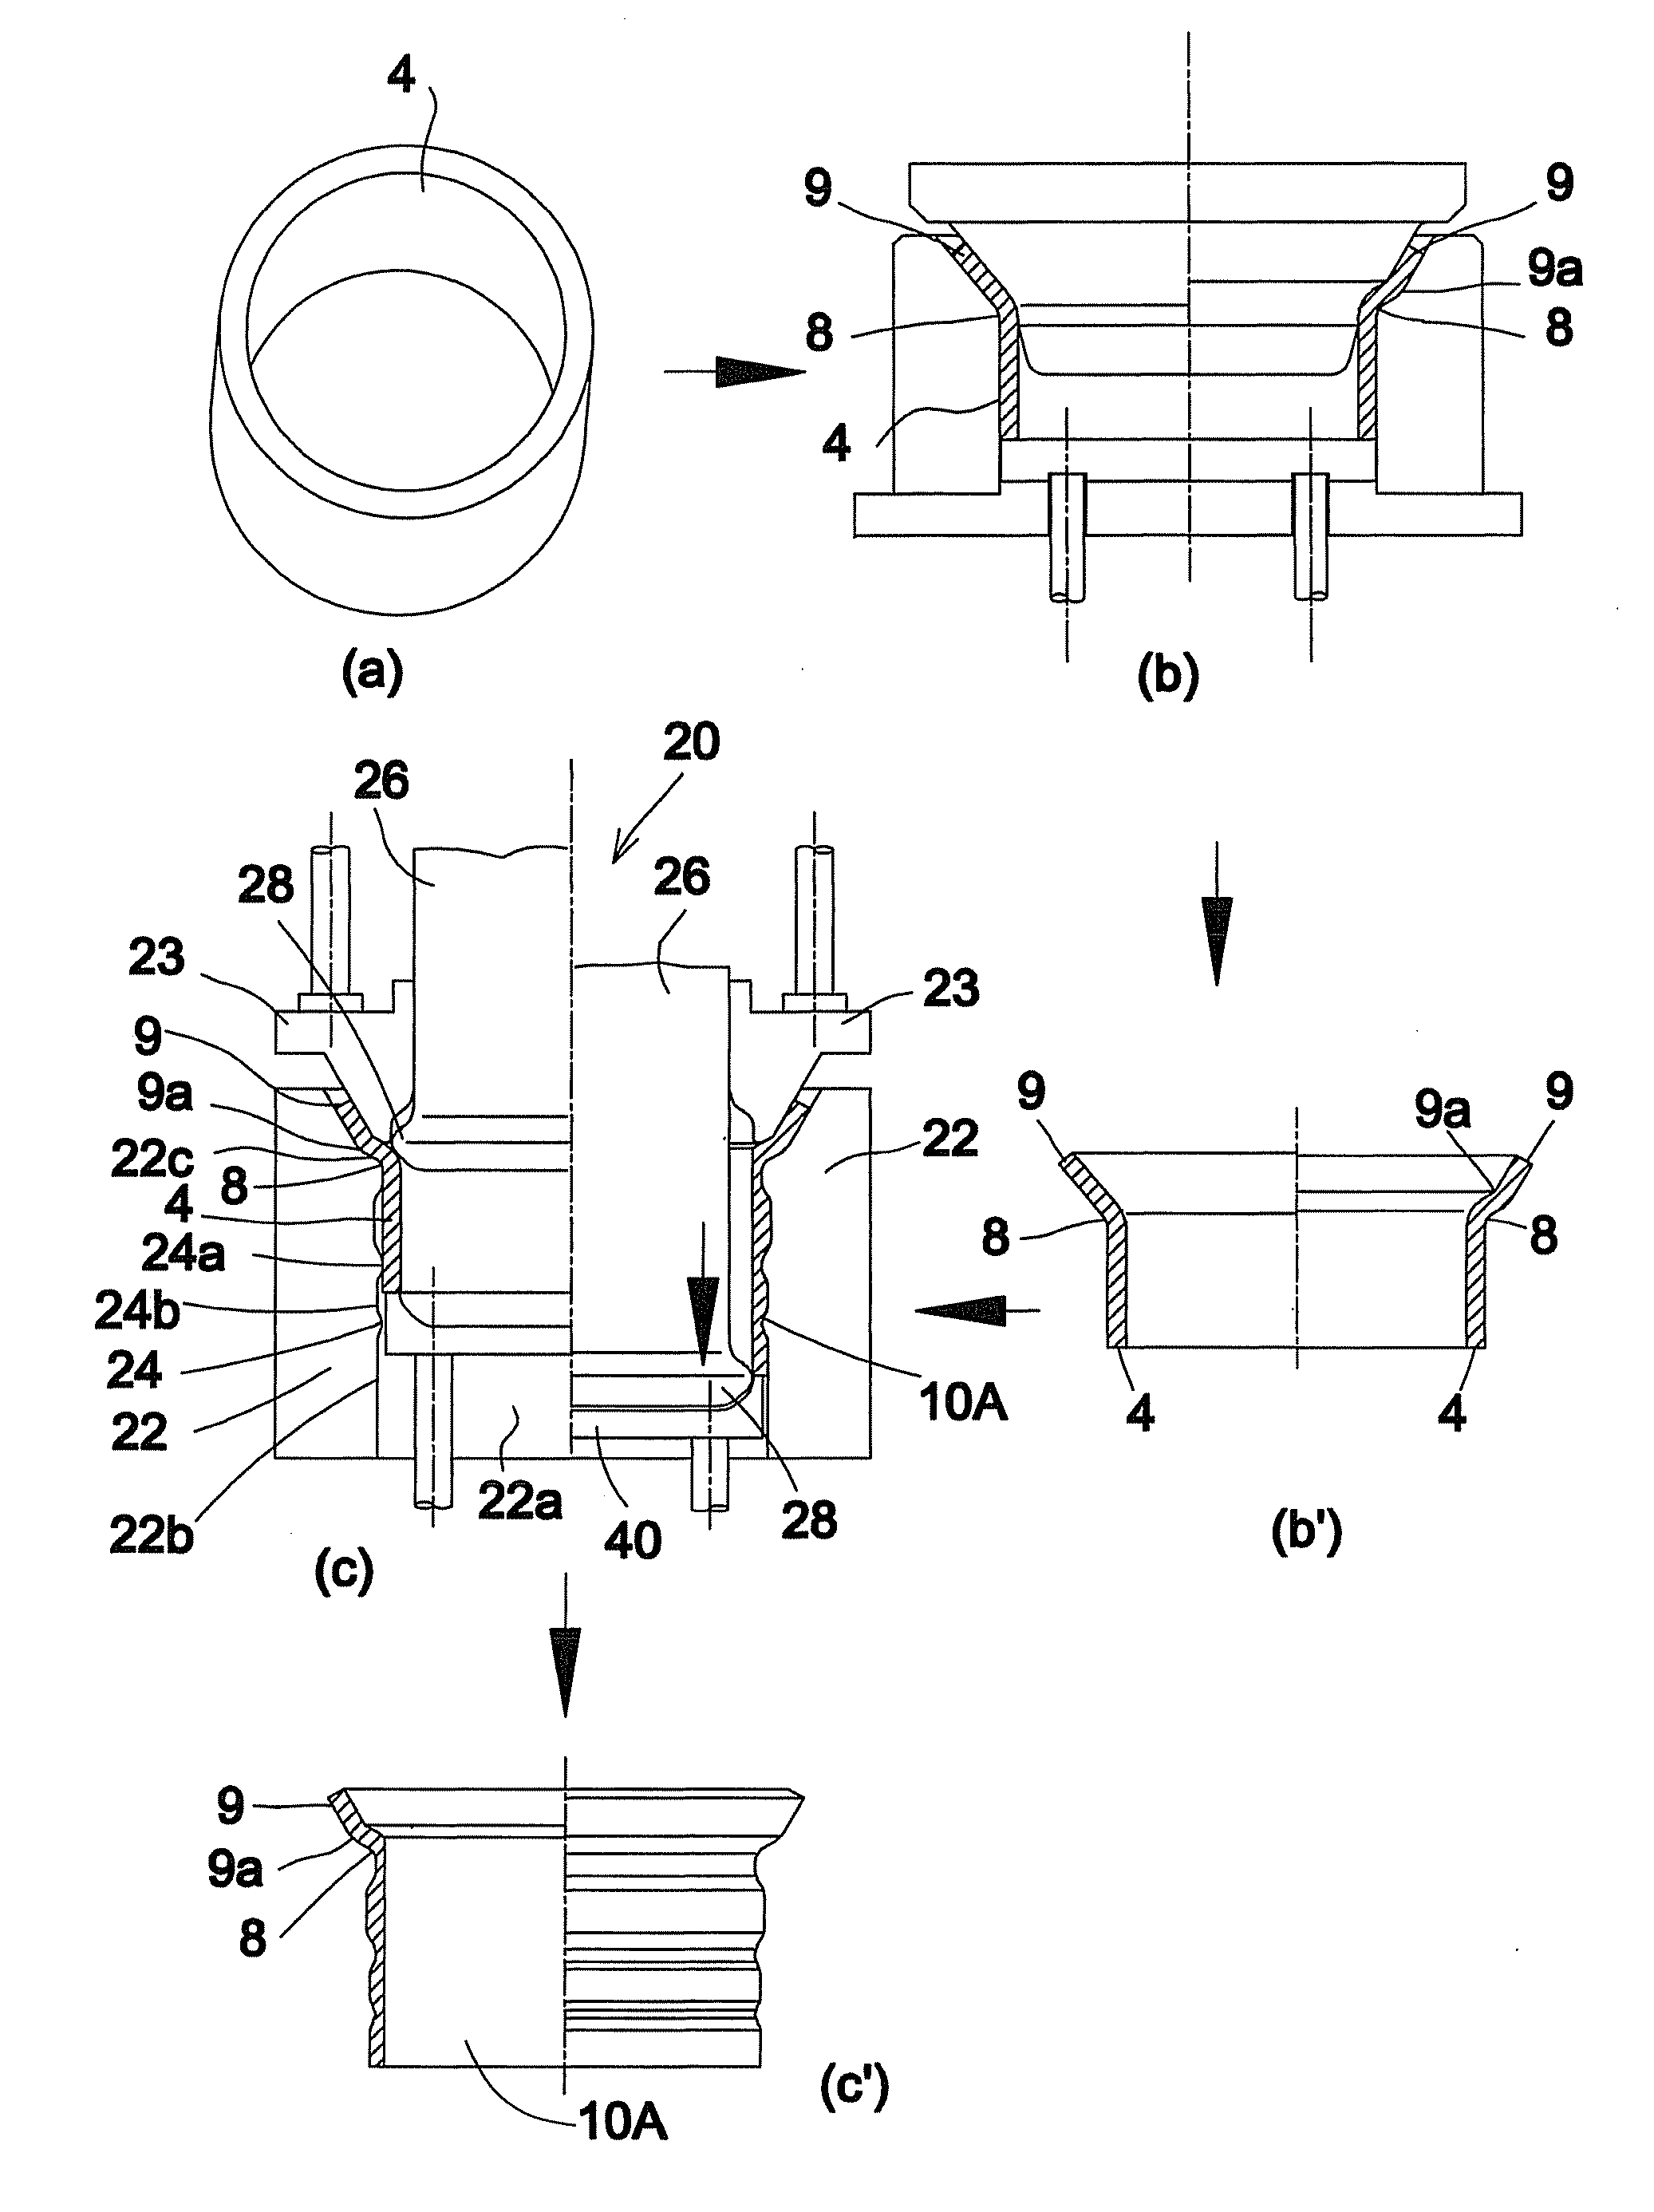 Method of manufacturing a wheel rim for a vehicle